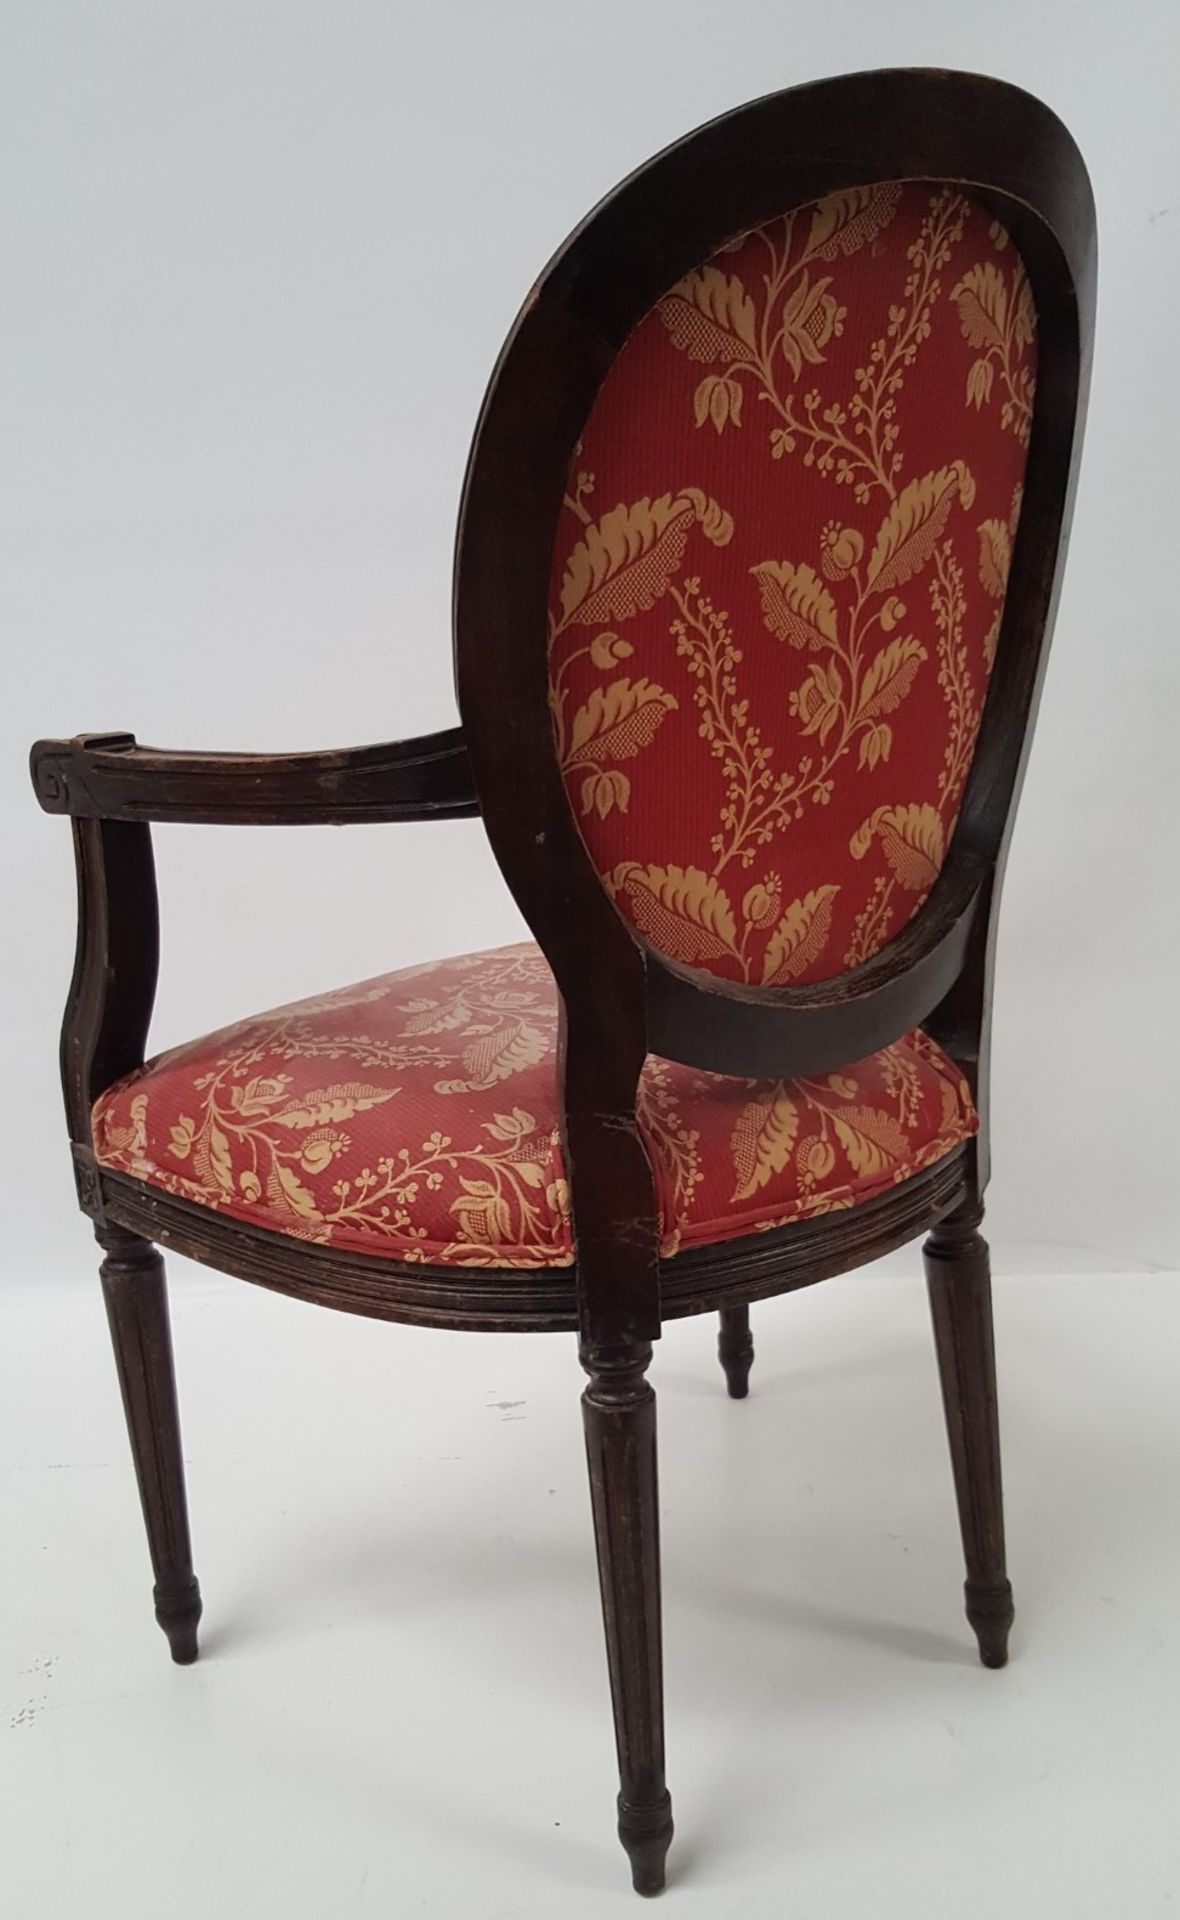 6 x Antique Style Wooden Chairs Upholstered In Red Fabric With Gold Leaf Design - CL431 - Image 3 of 8